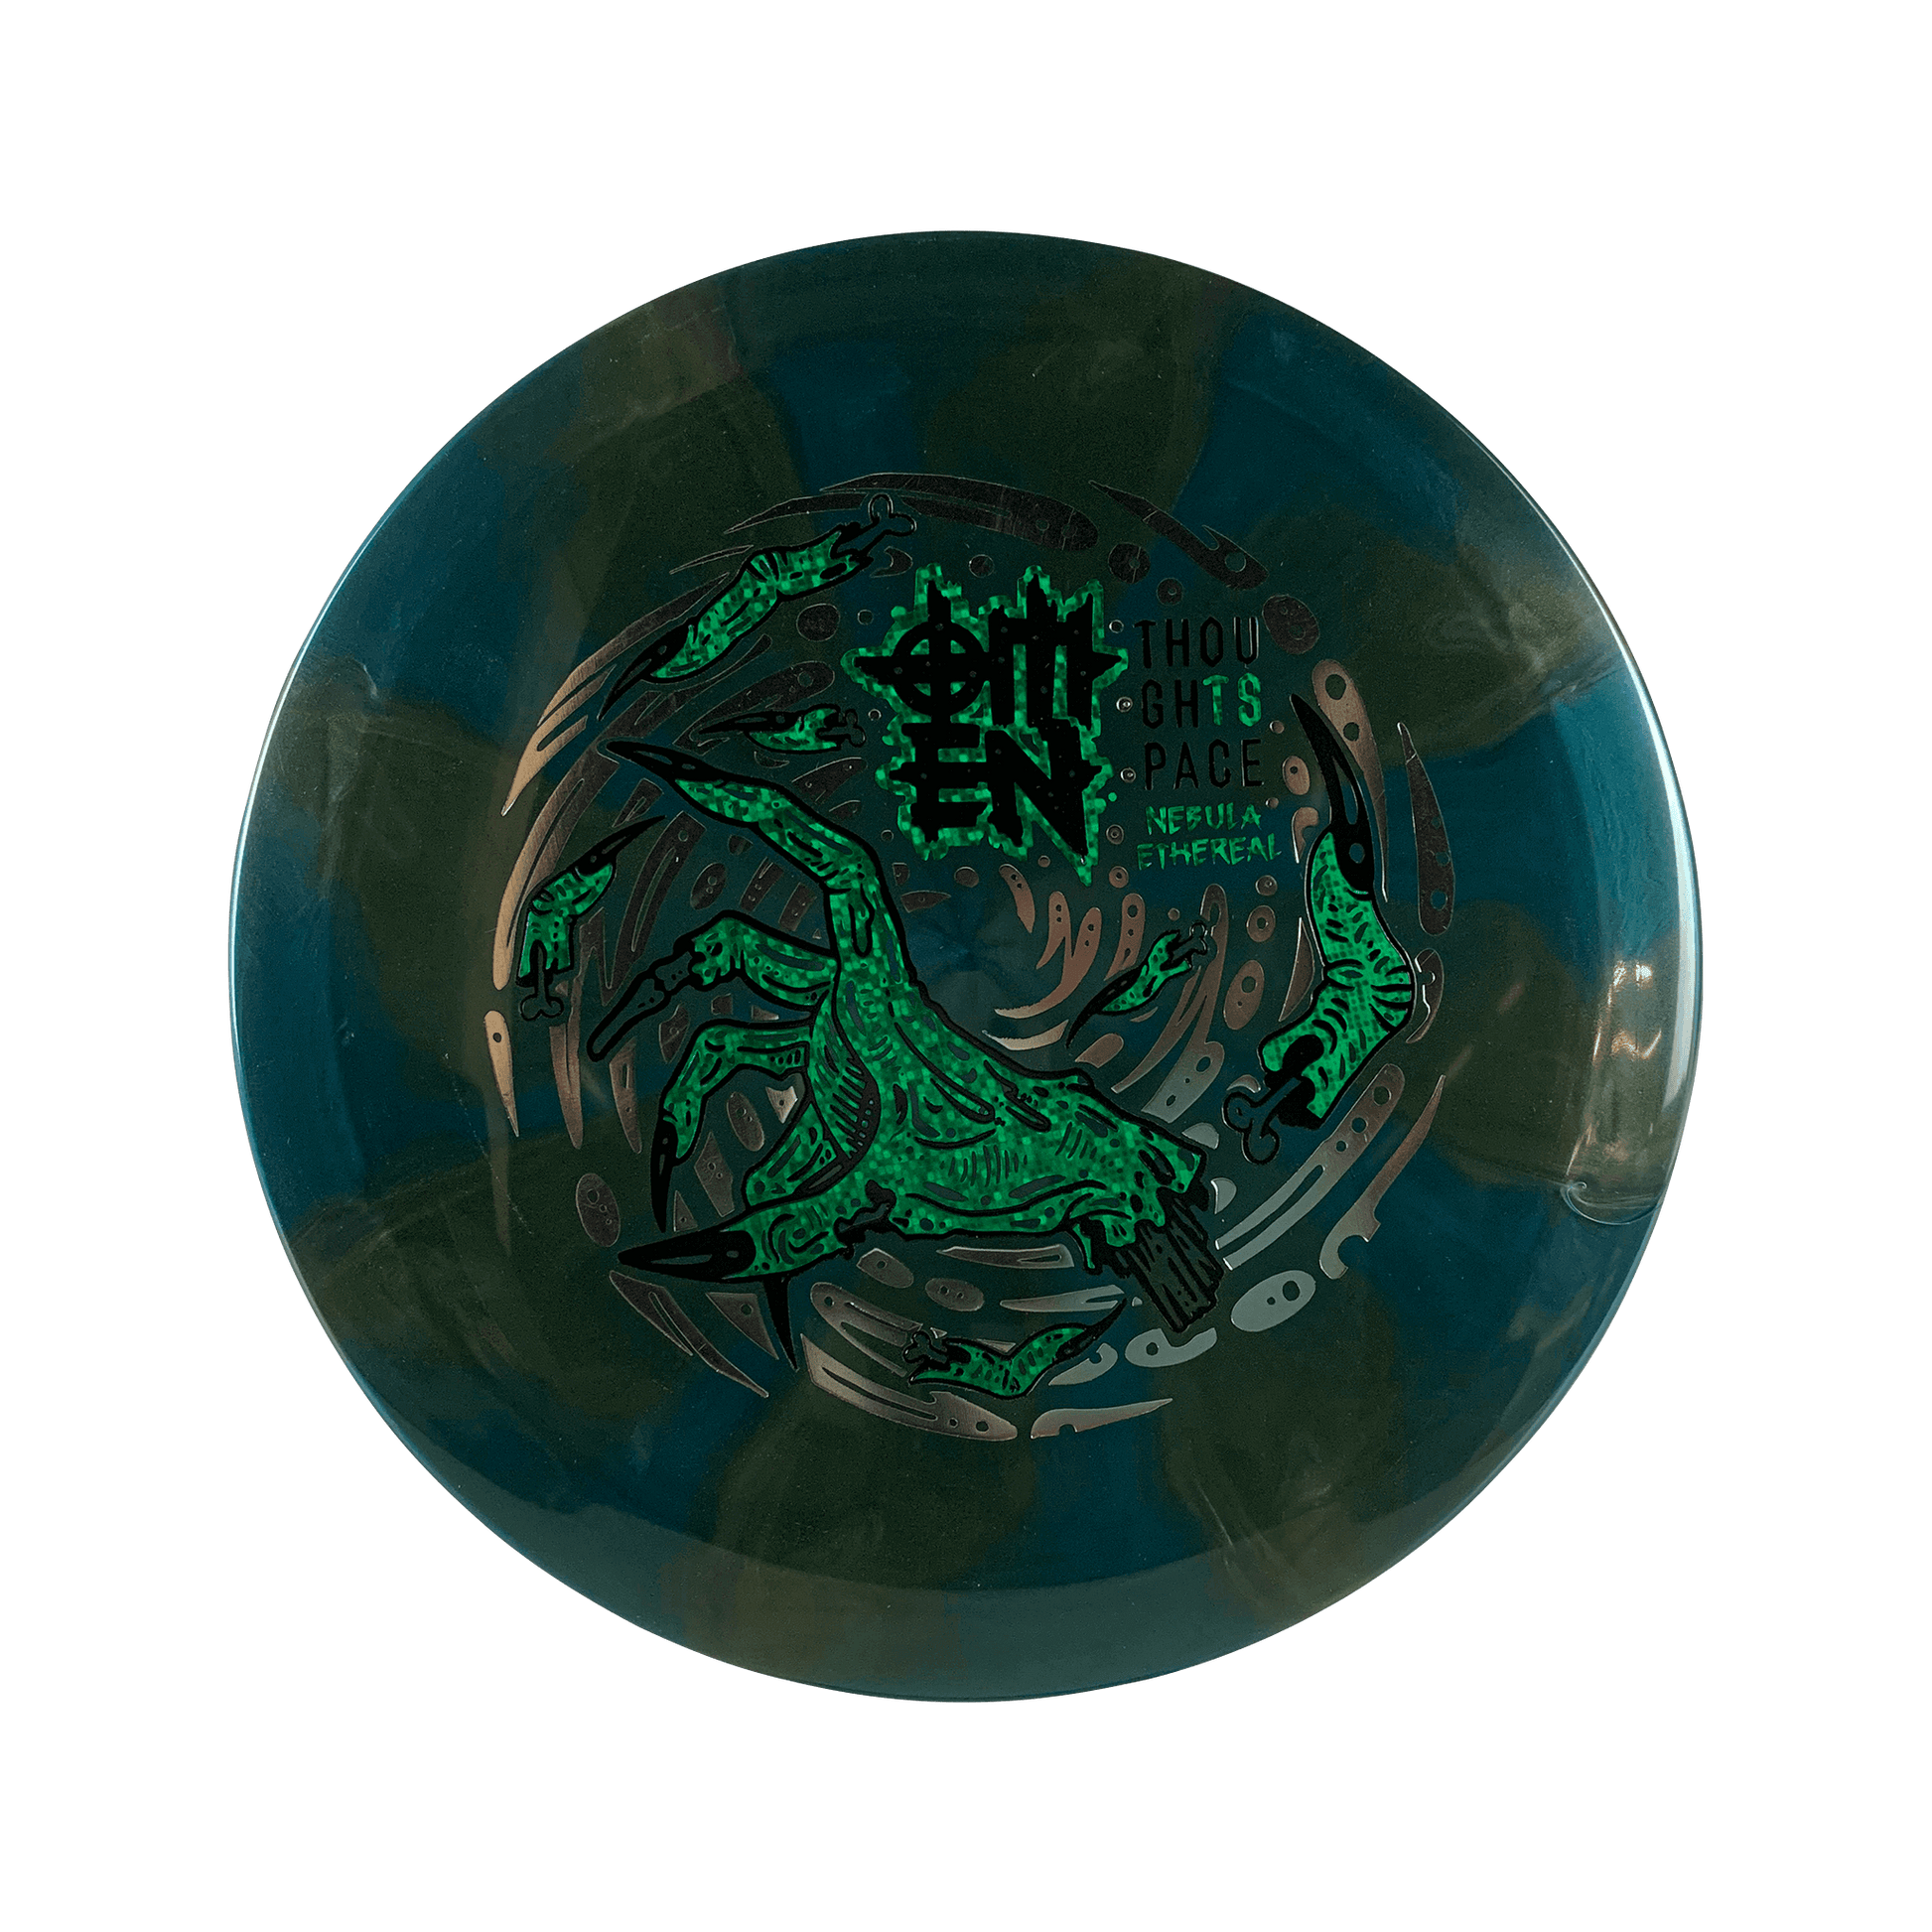 Nebula Ethereal Omen Disc Thought Space Athletics multi / teal 173 